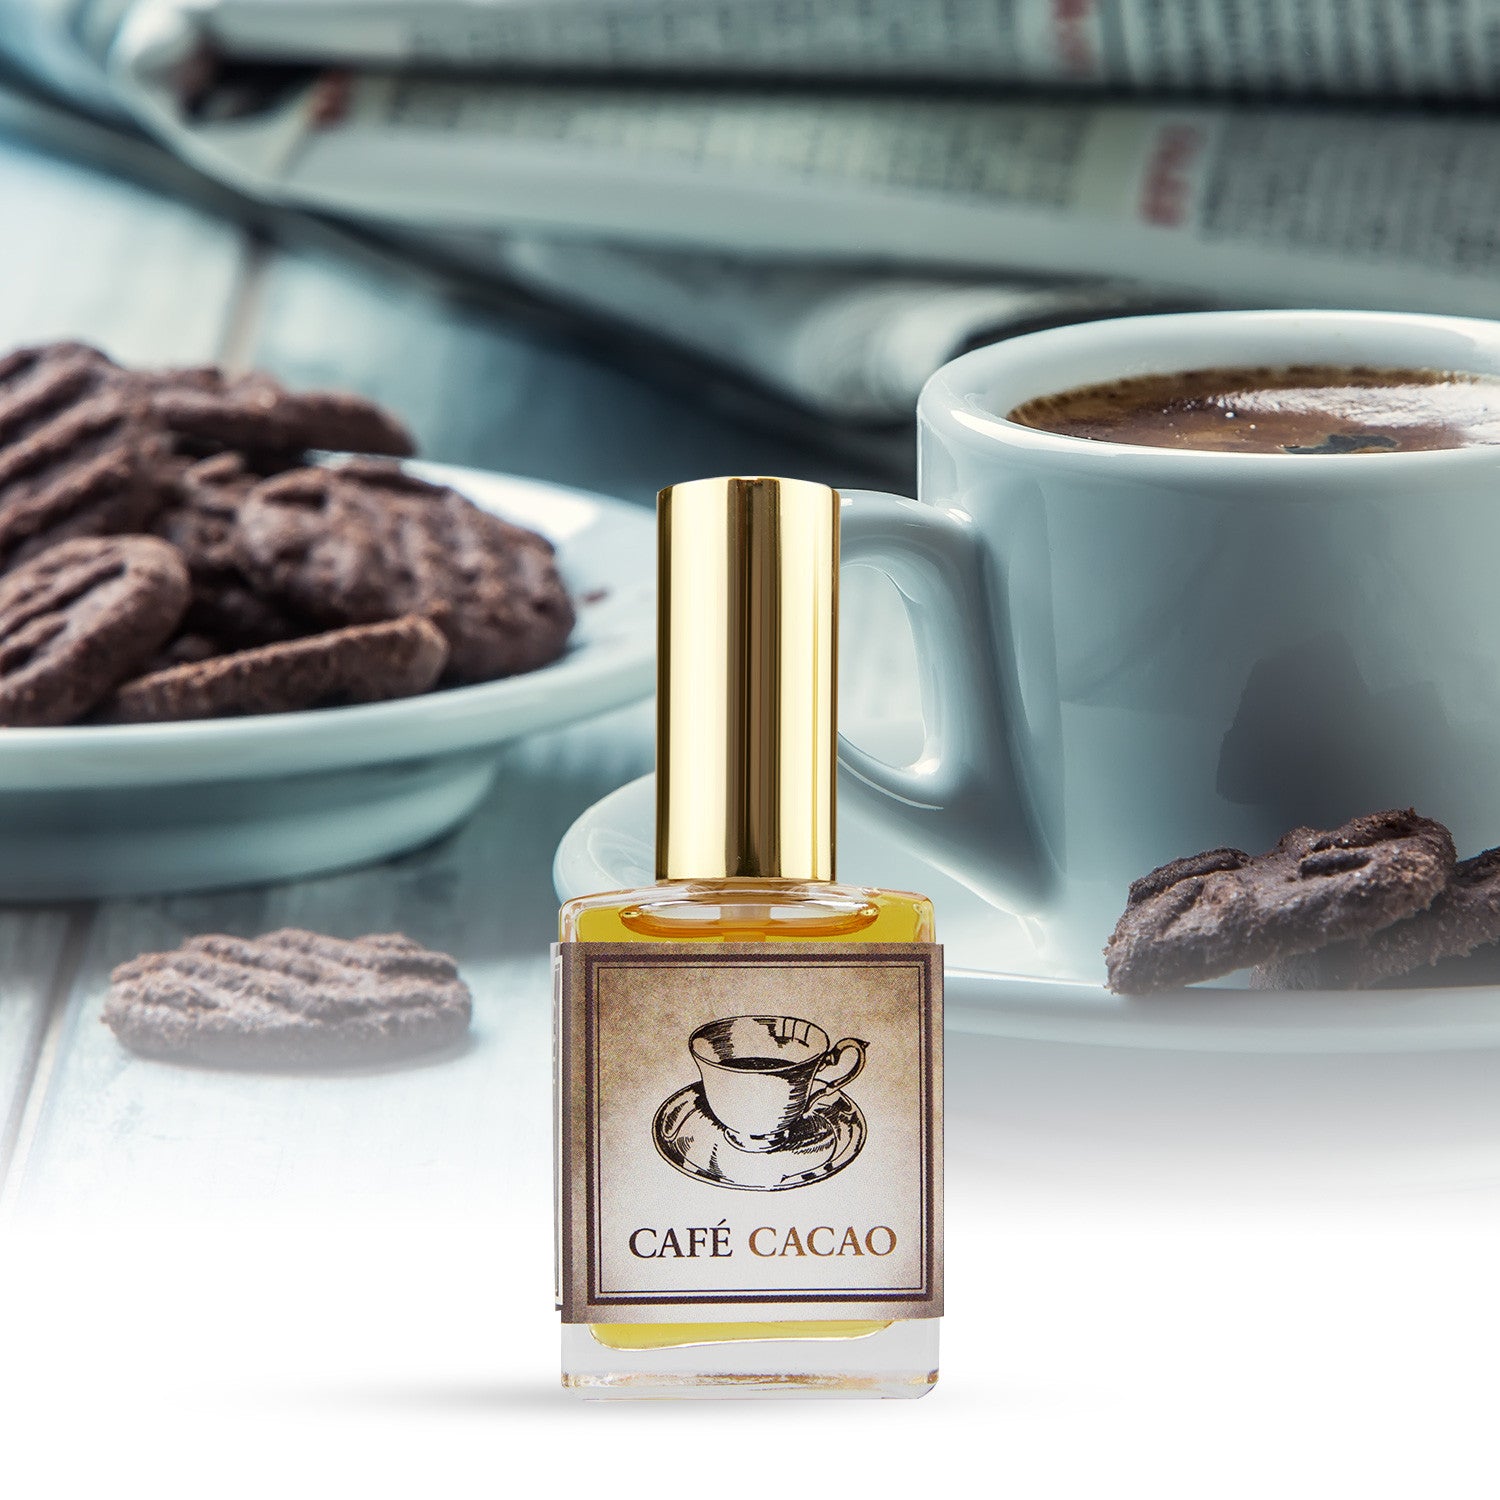 LOUIS CARDIN SACRED REVIEW & 4160 TUESDAYS OVER THE CHOCOLATE SHOP FRAGRANCE  REVIEWS! 